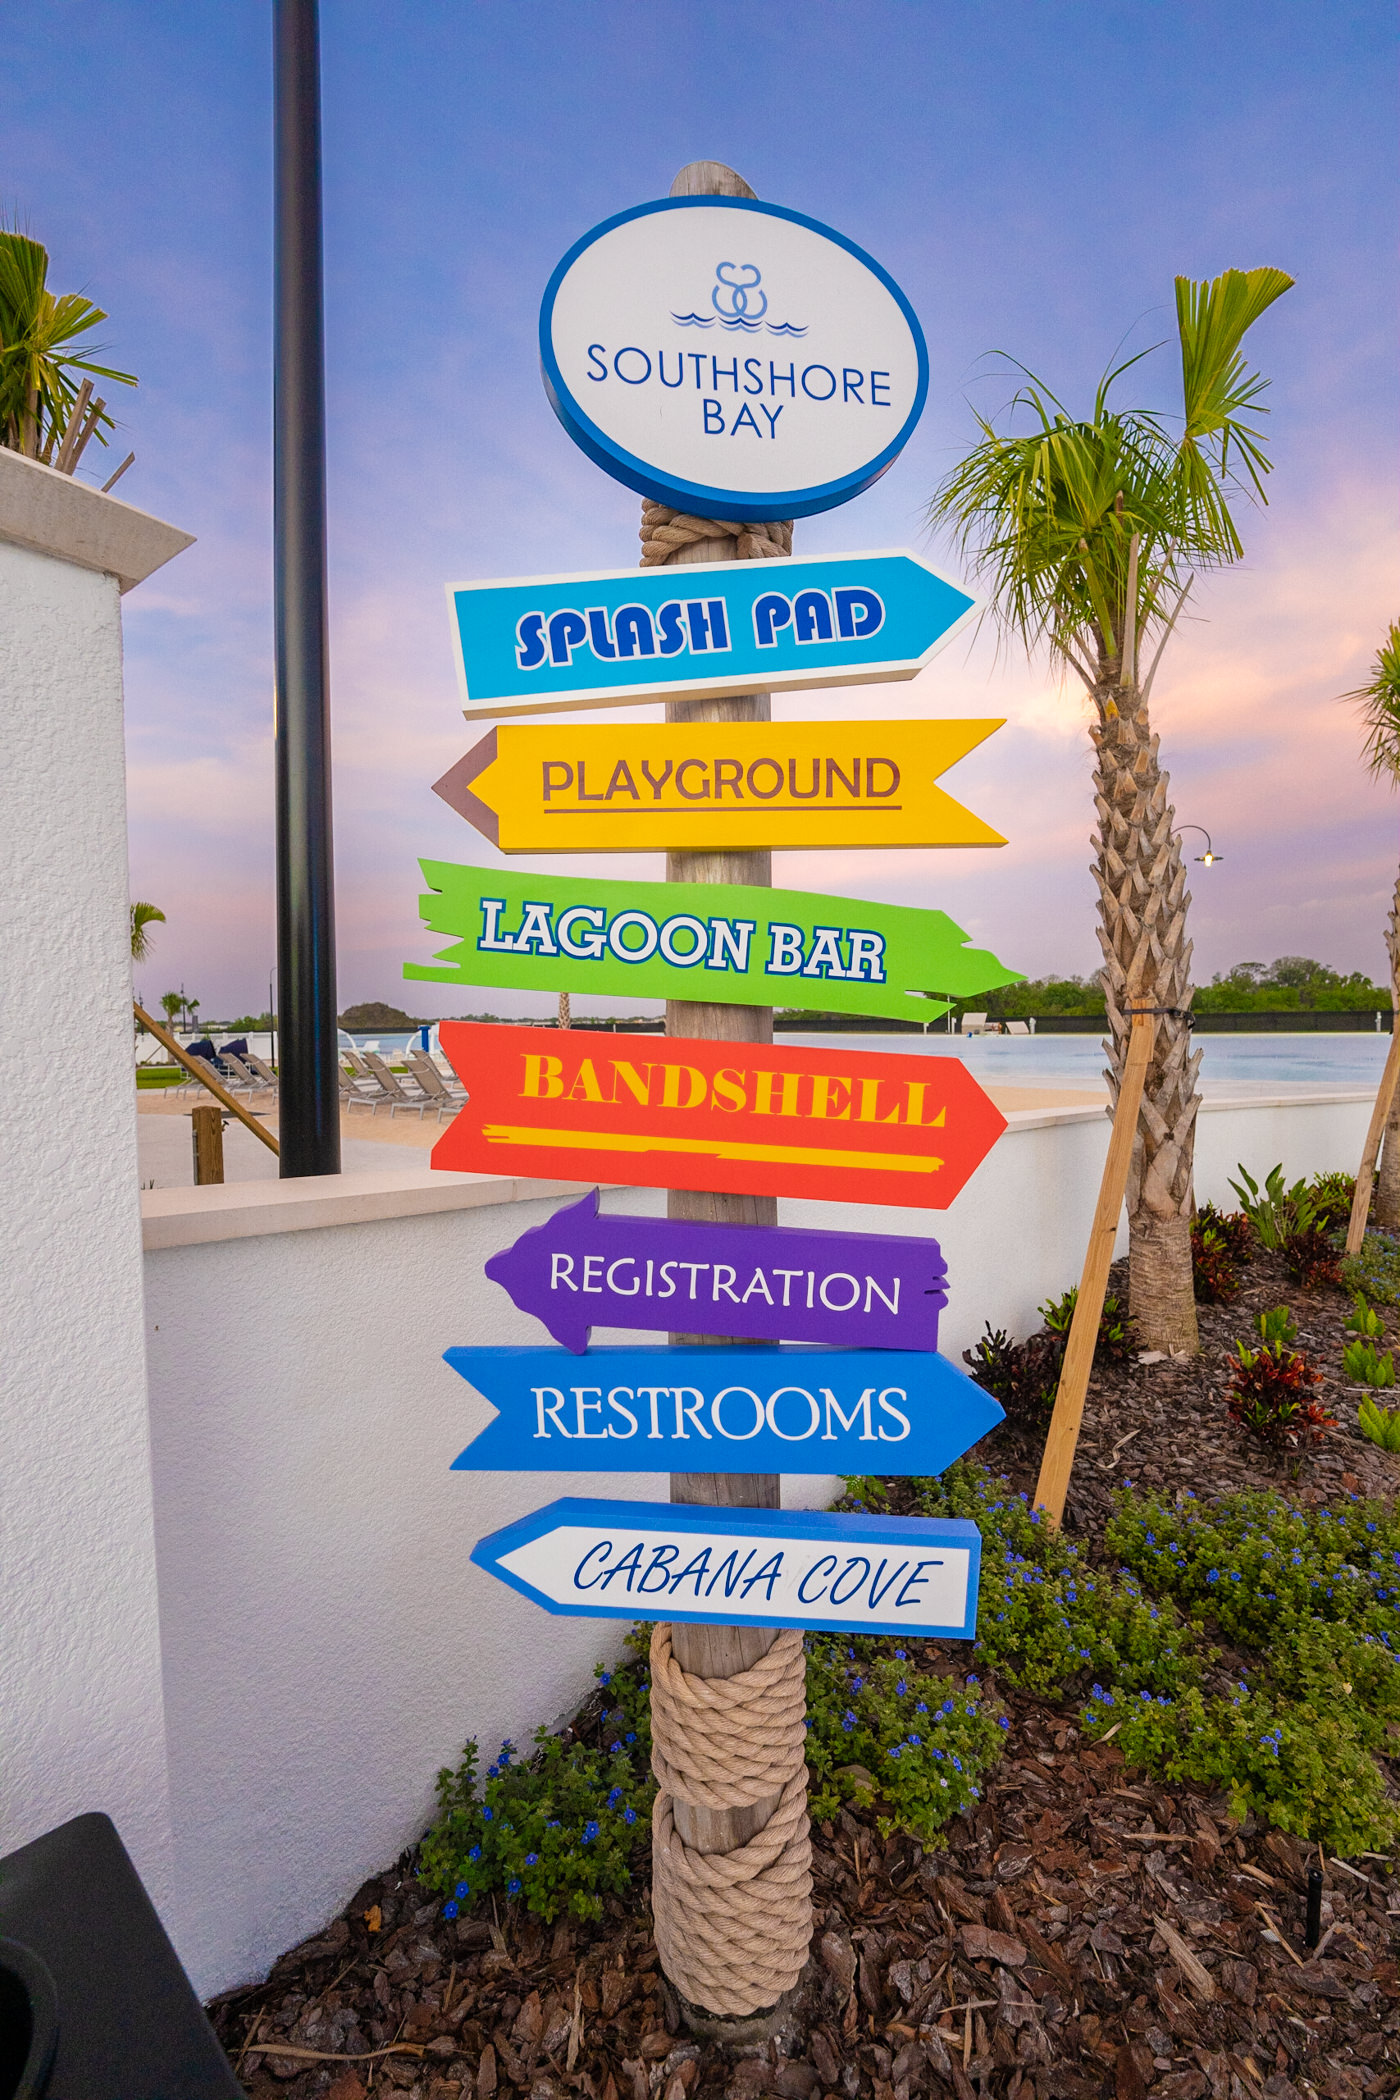 Southshore Bay directional sign